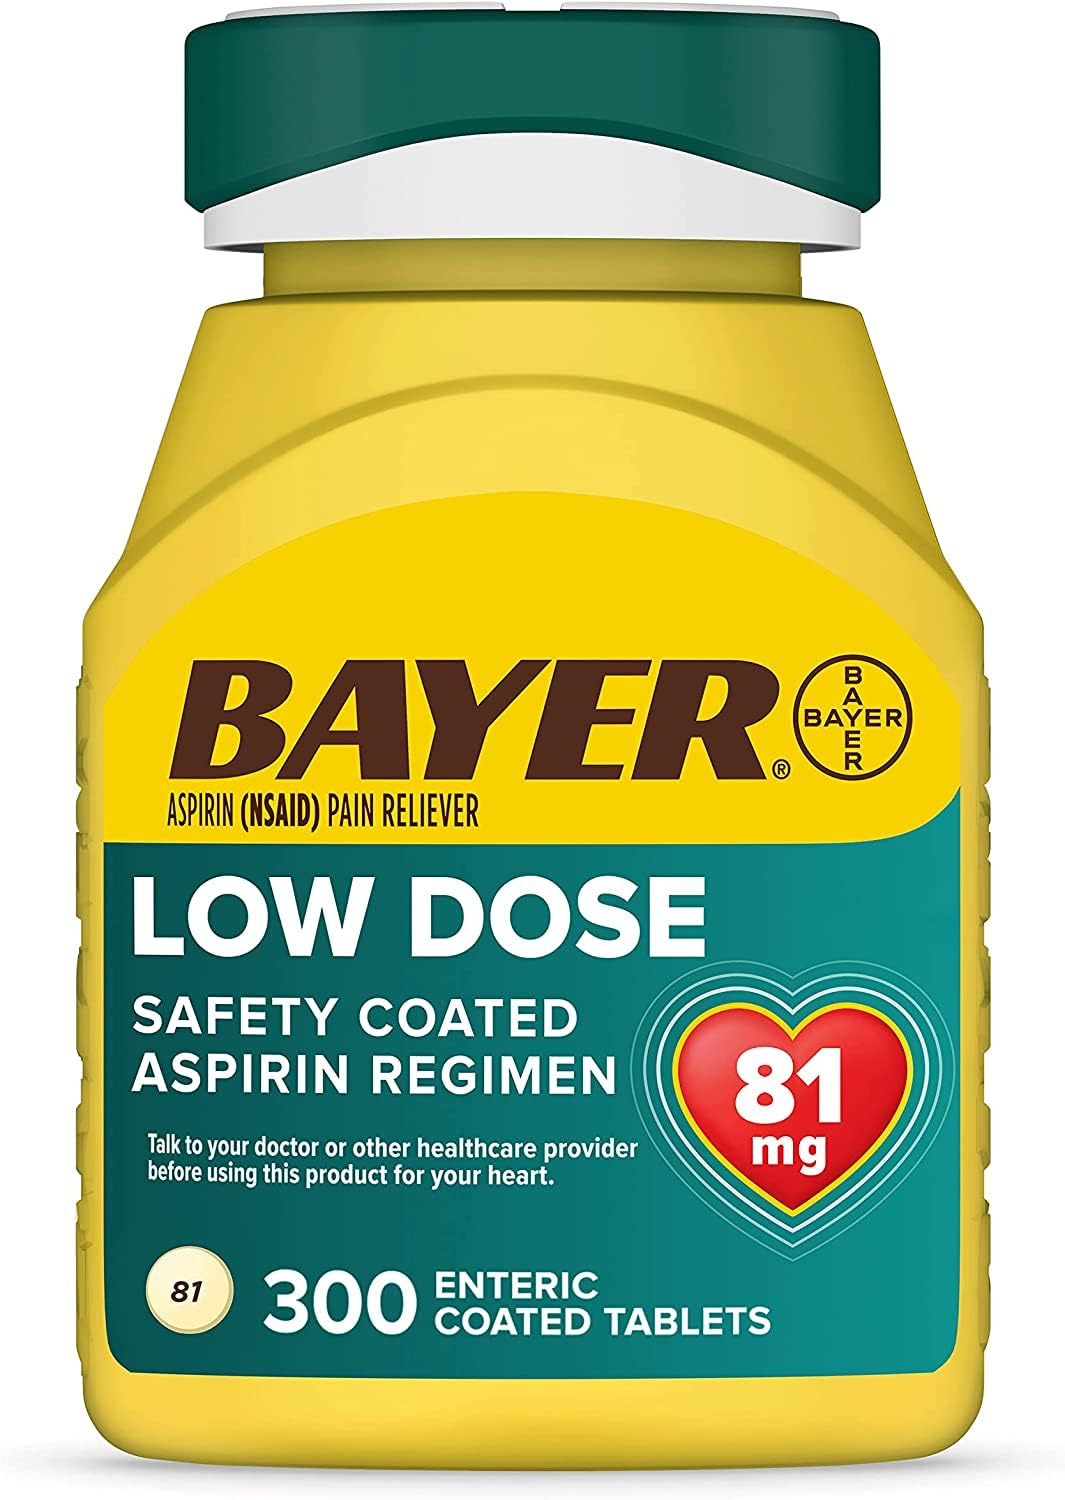 Bayer Enteric Coated Aspirin 81mg Tablets, Safety Coated Low Dose Aspirin Regimen forSecondary Heart Attack and Ischemic Stroke Prevention and Pain Relief - 300 Count